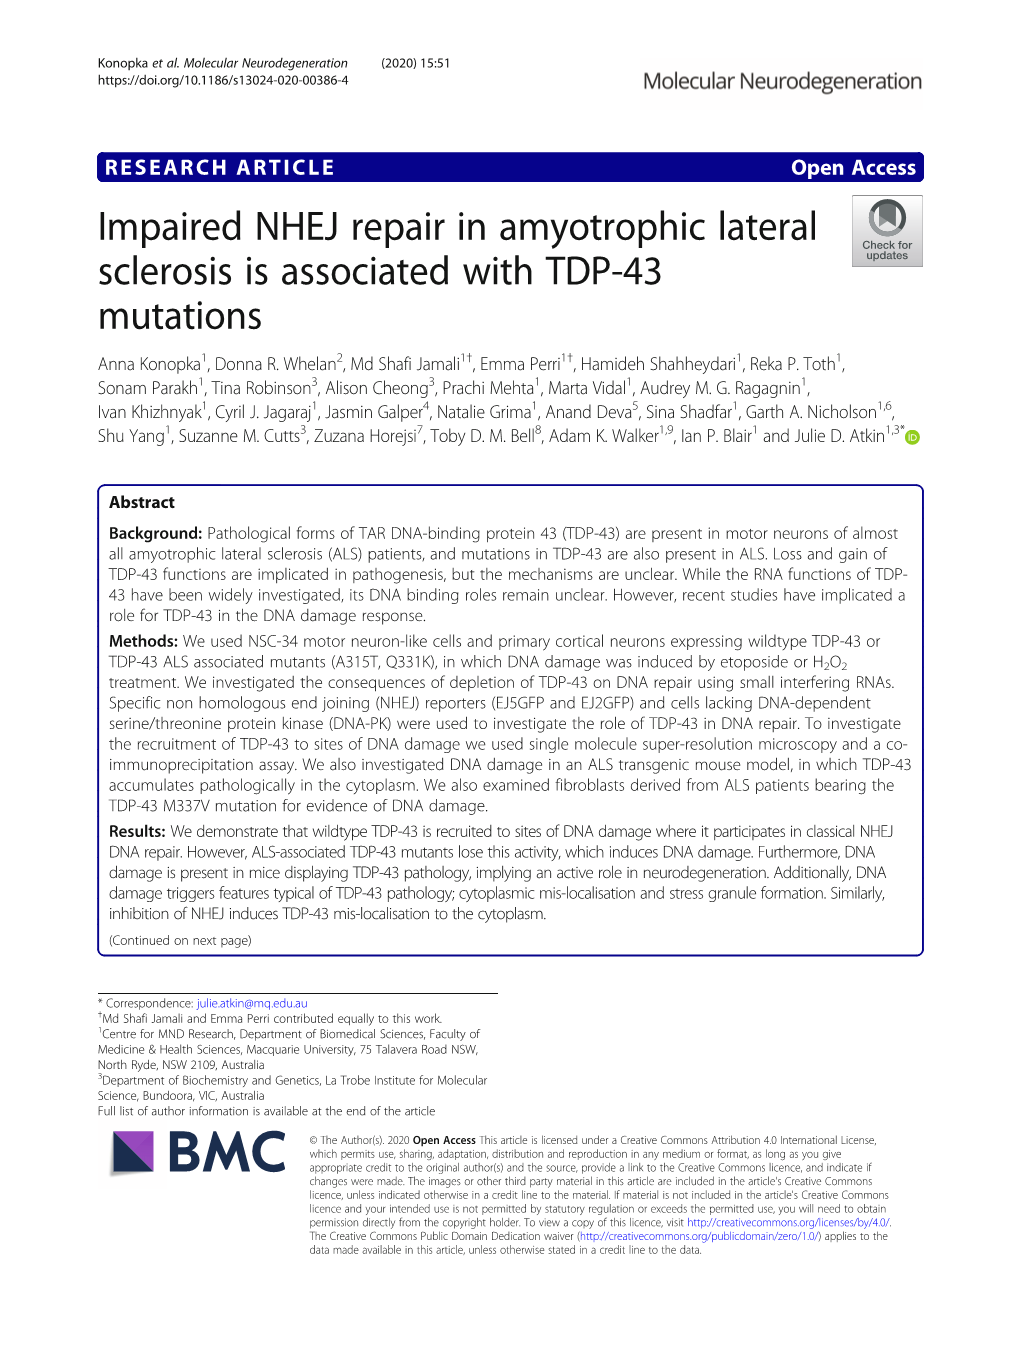 Impaired NHEJ Repair in Amyotrophic Lateral Sclerosis Is Associated with TDP-43 Mutations Anna Konopka1, Donna R